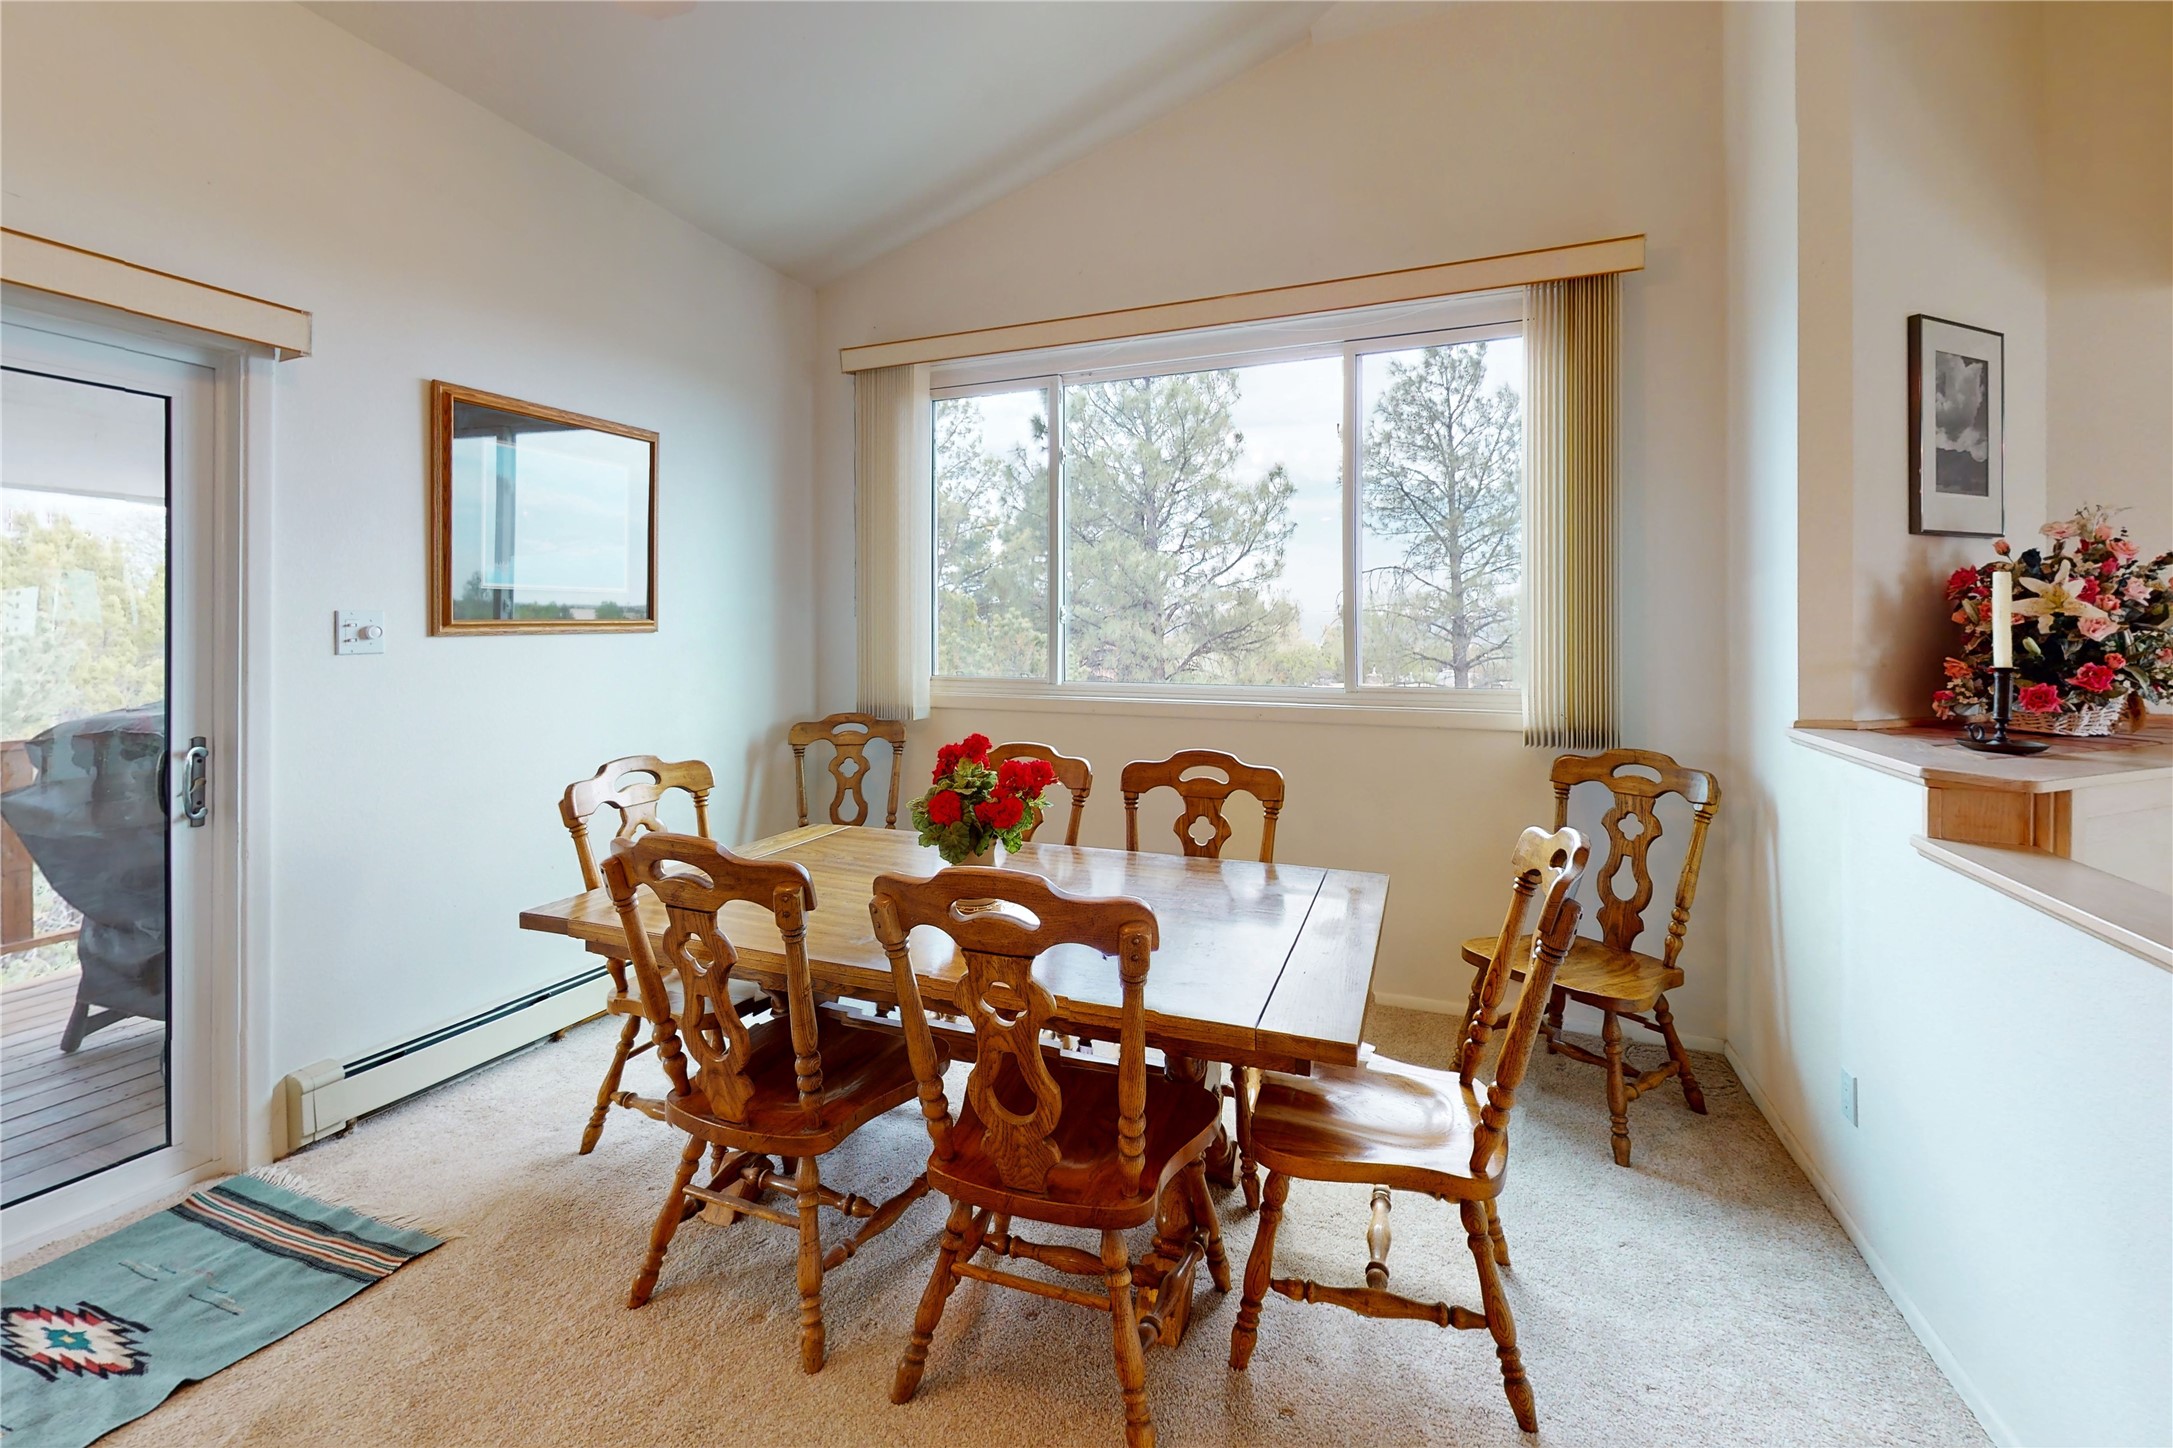 24 Grand Canyon Drive, White Rock, New Mexico 87547, 4 Bedrooms Bedrooms, ,3 BathroomsBathrooms,Residential,For Sale,24 Grand Canyon Drive,202338300